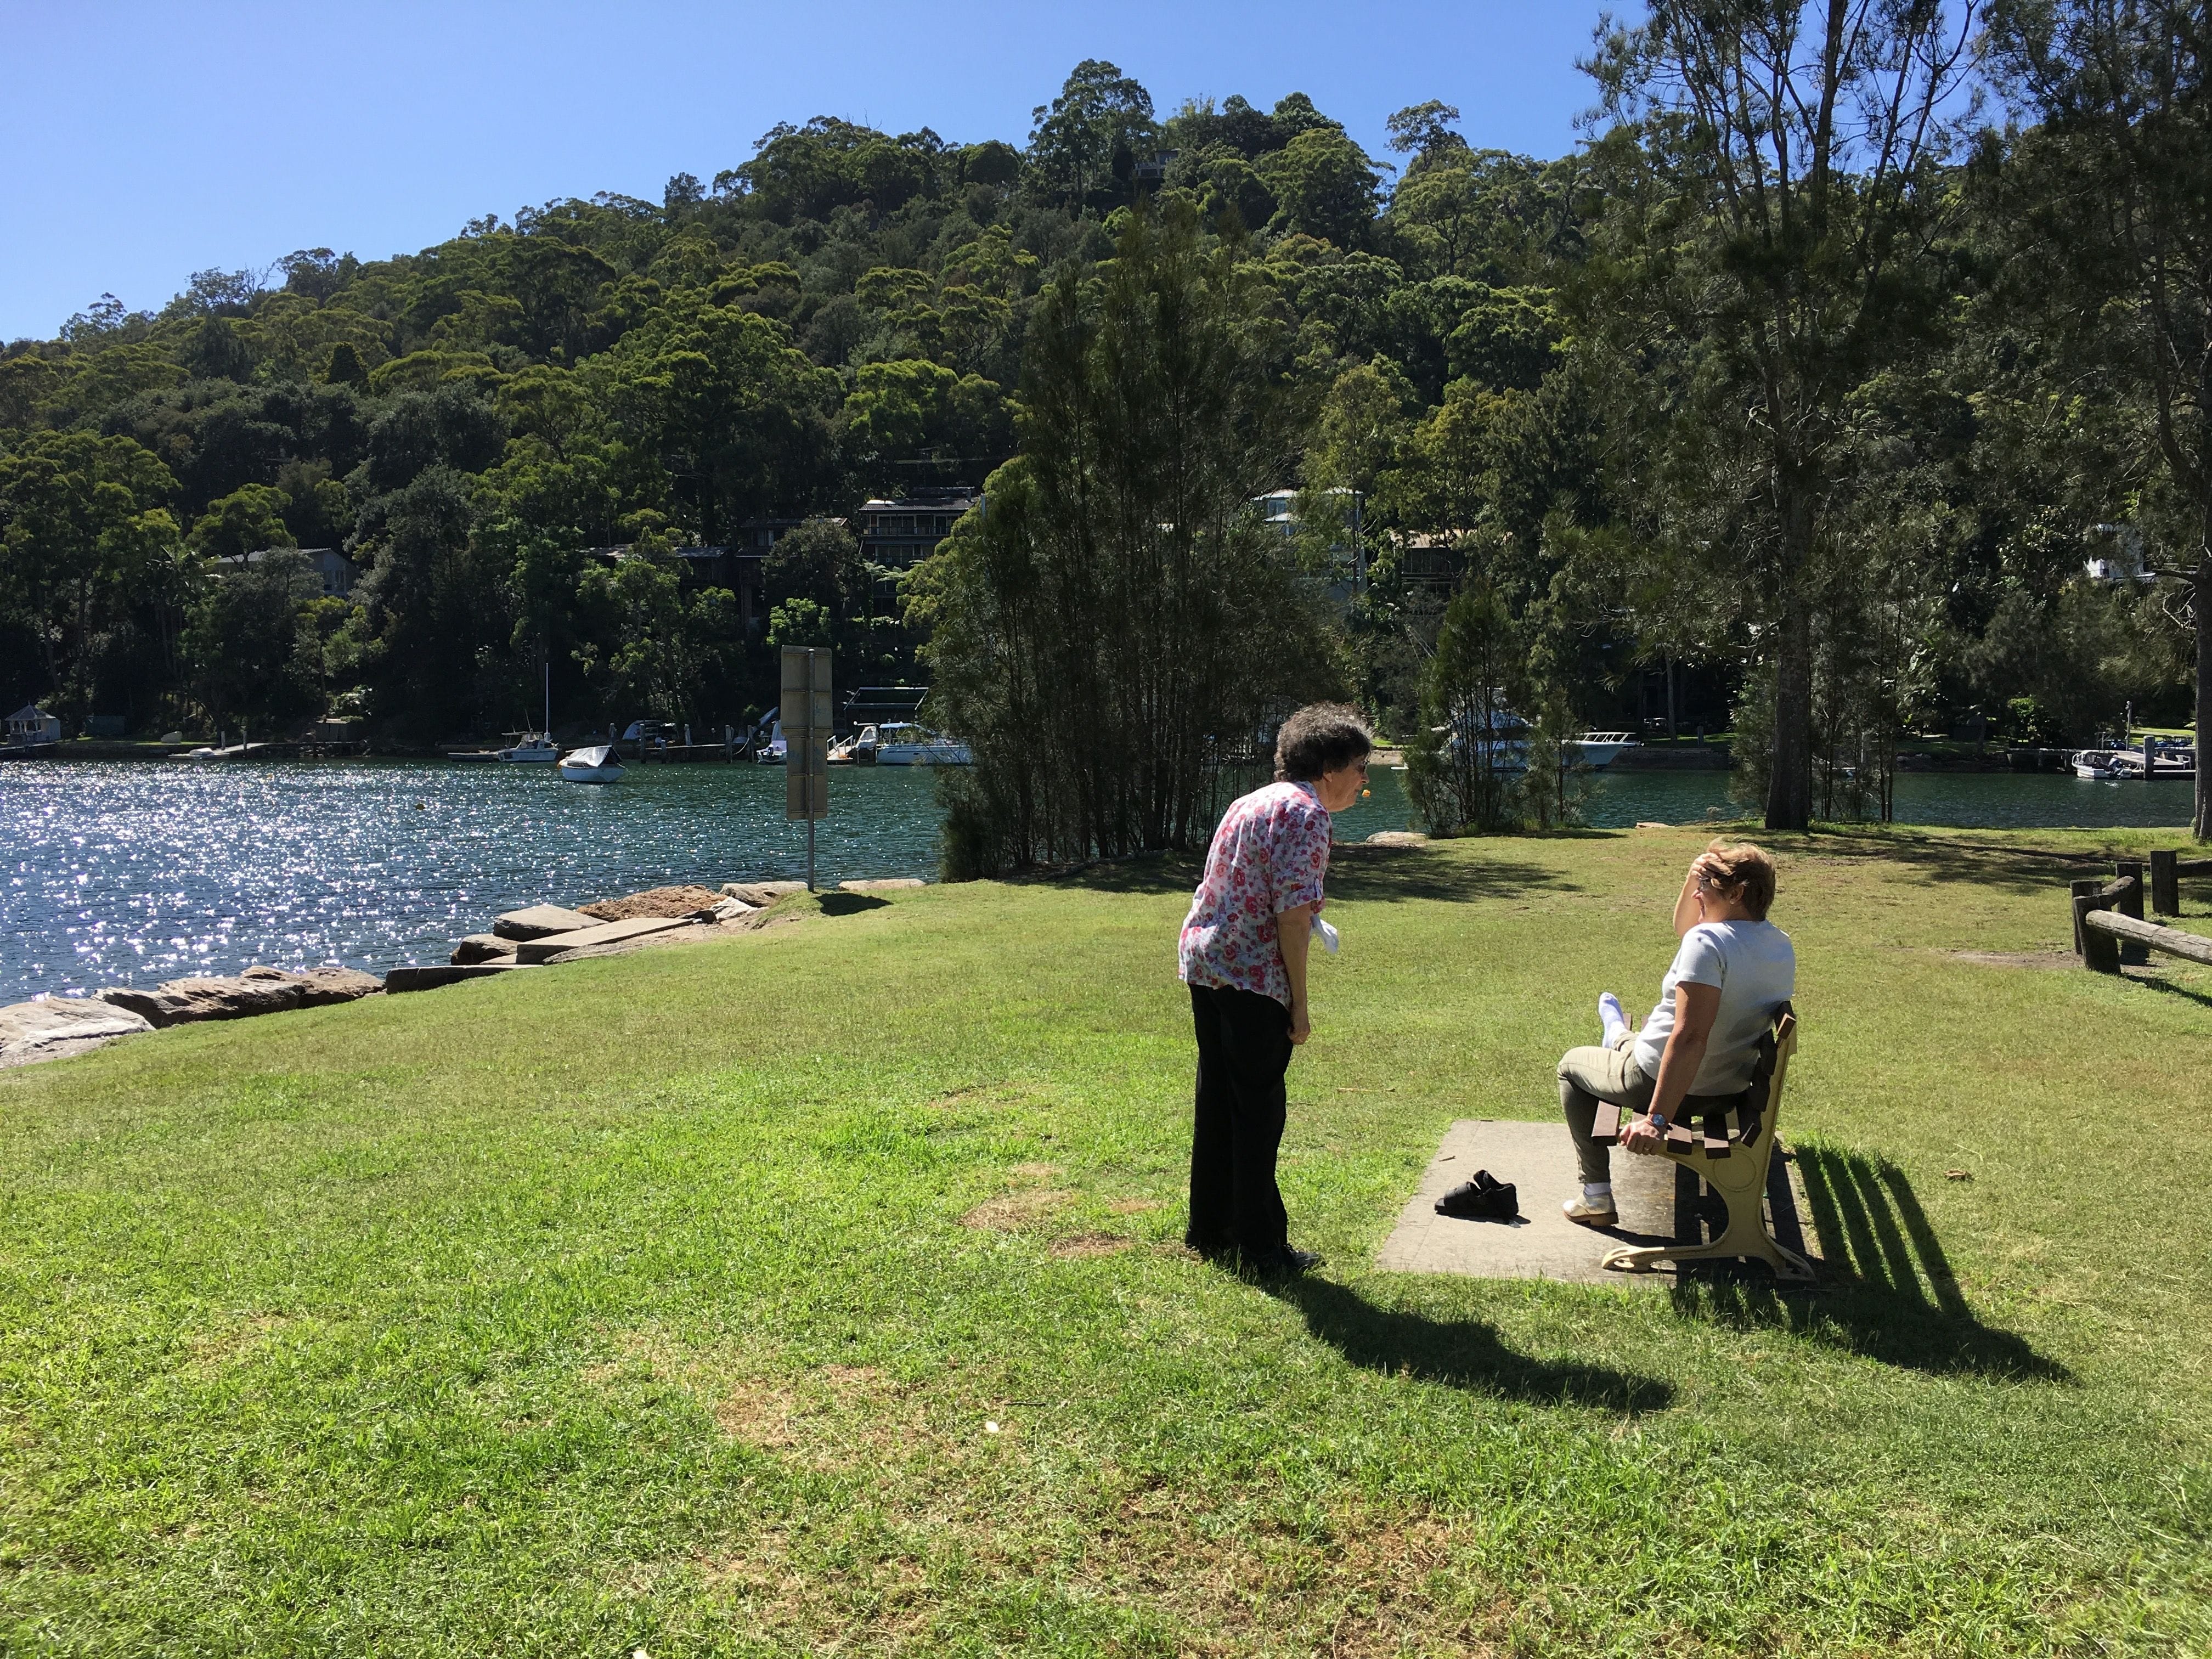 Northern Beaches Public Day Tour febuary 2019 Image -5c64966694790